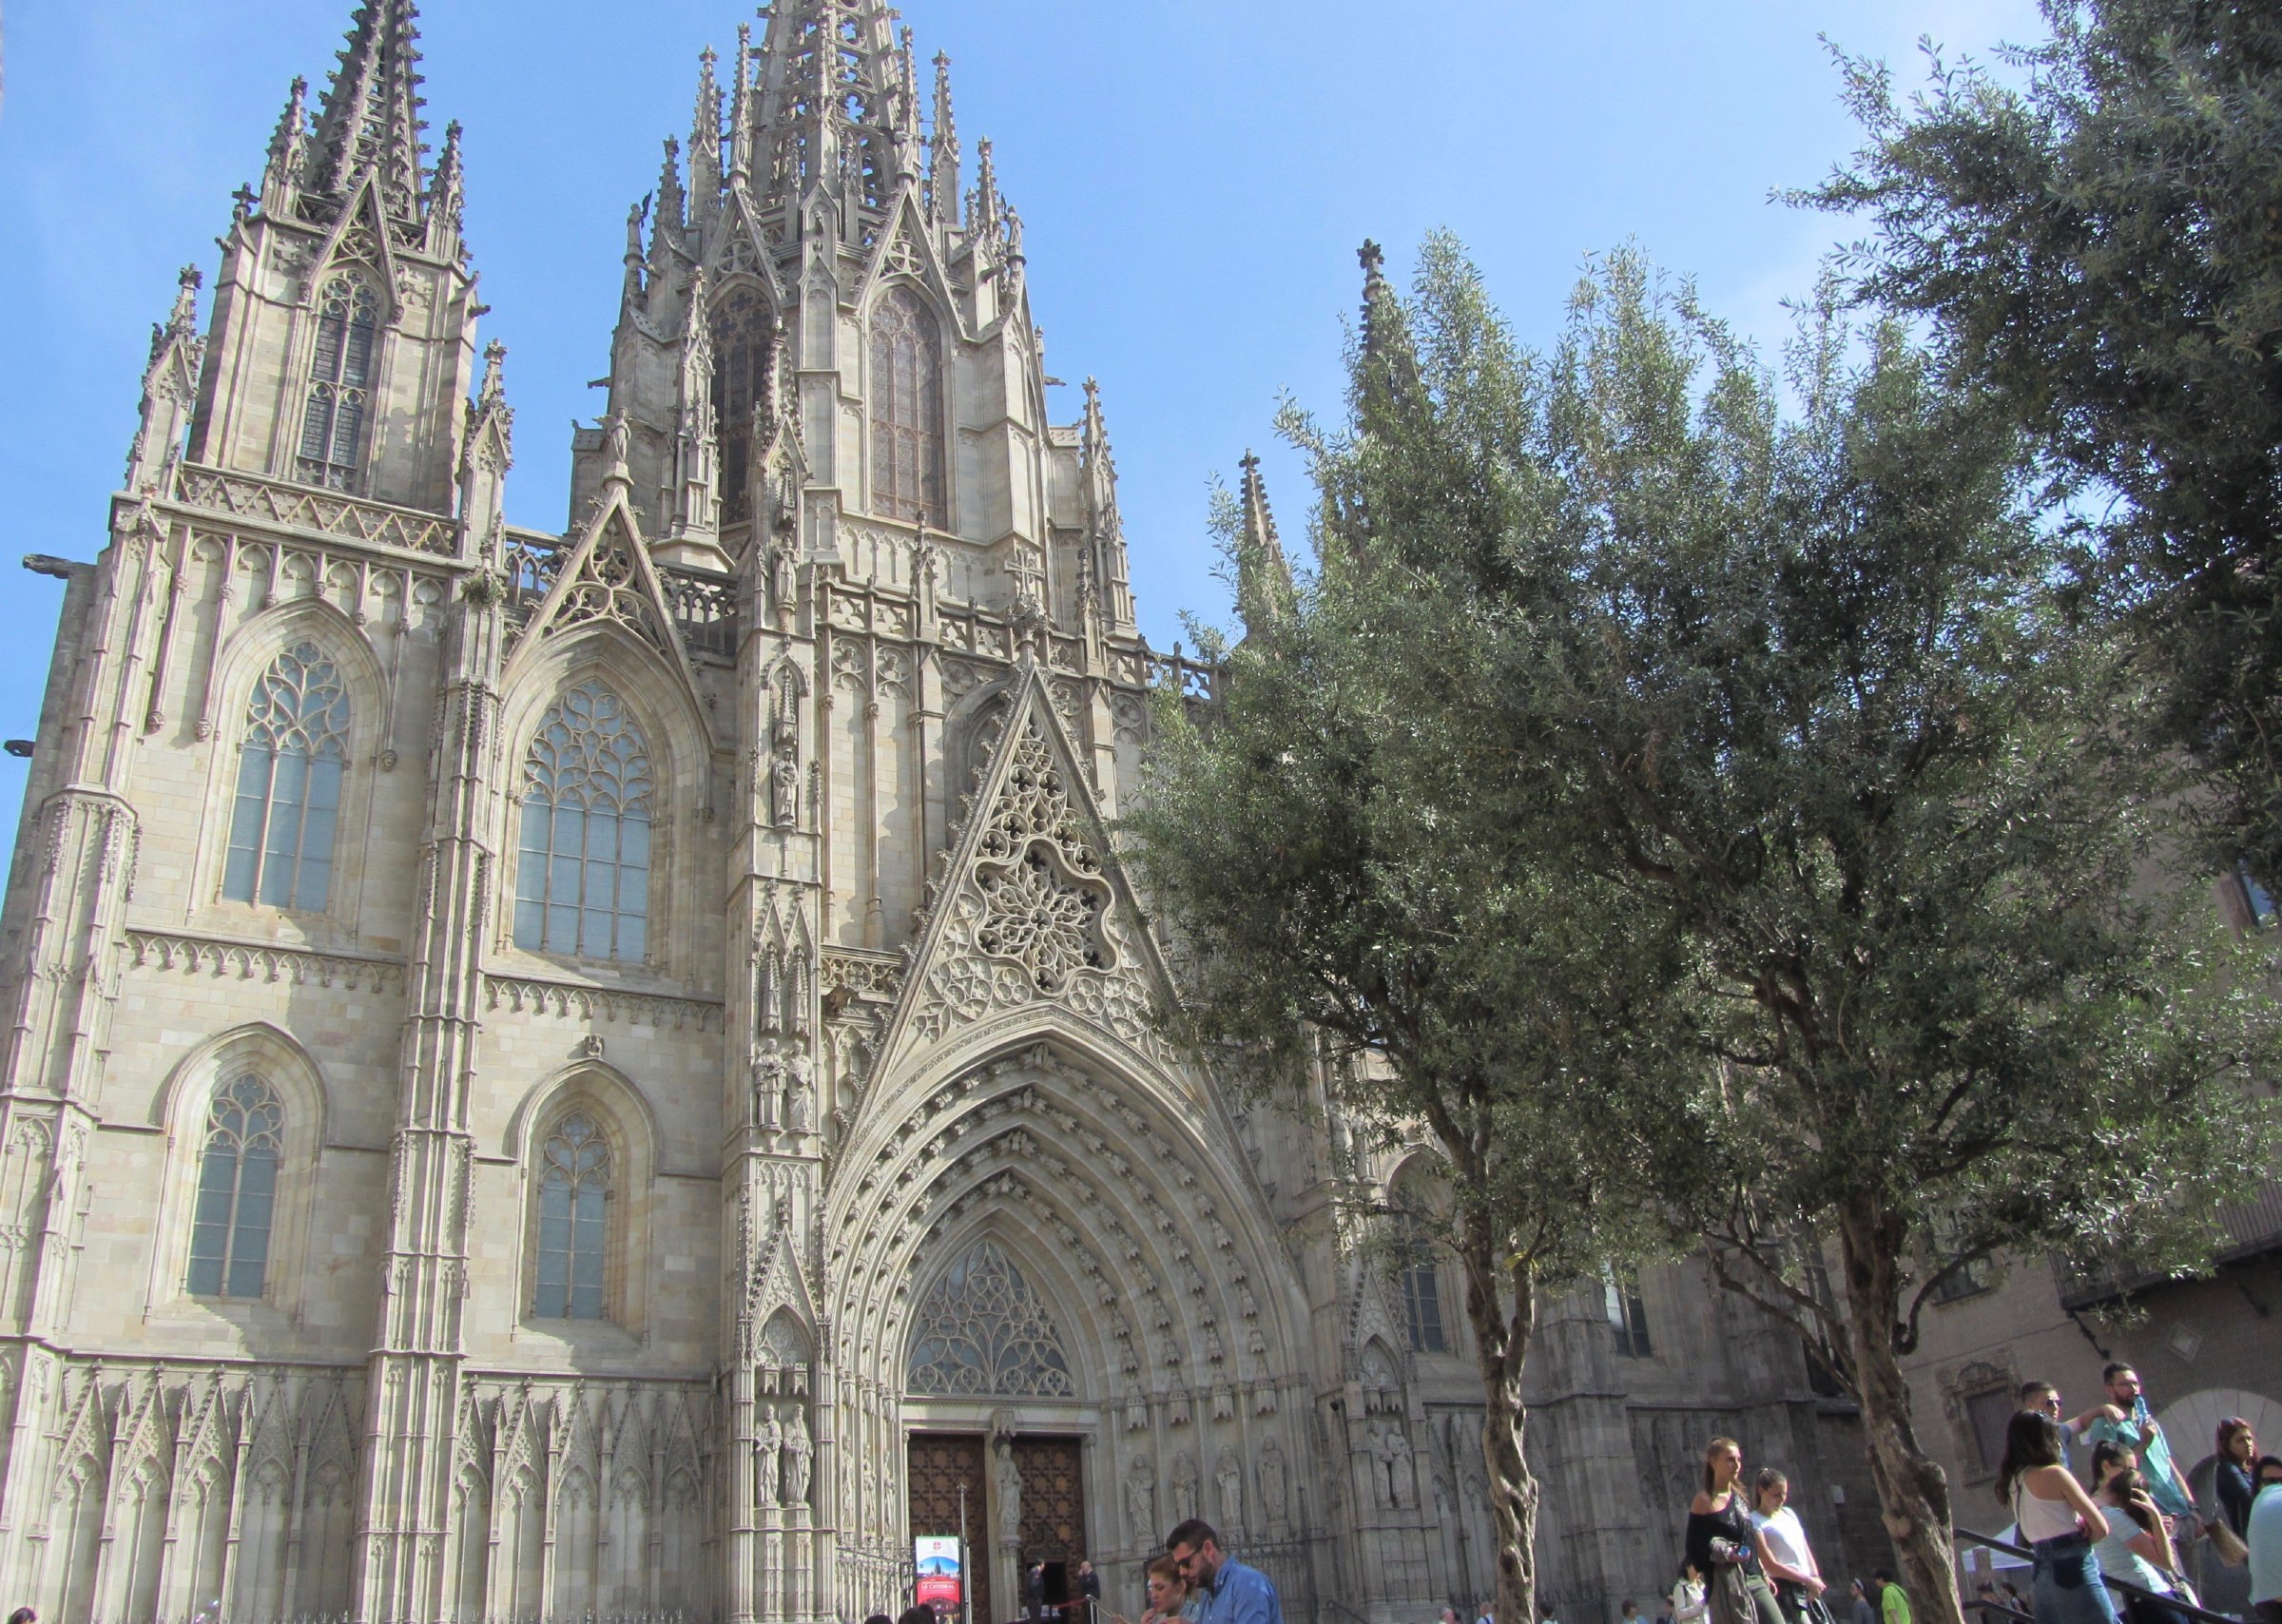 La Catedral | Barcelona, Spain Attractions - Lonely Planet2400 x 1708